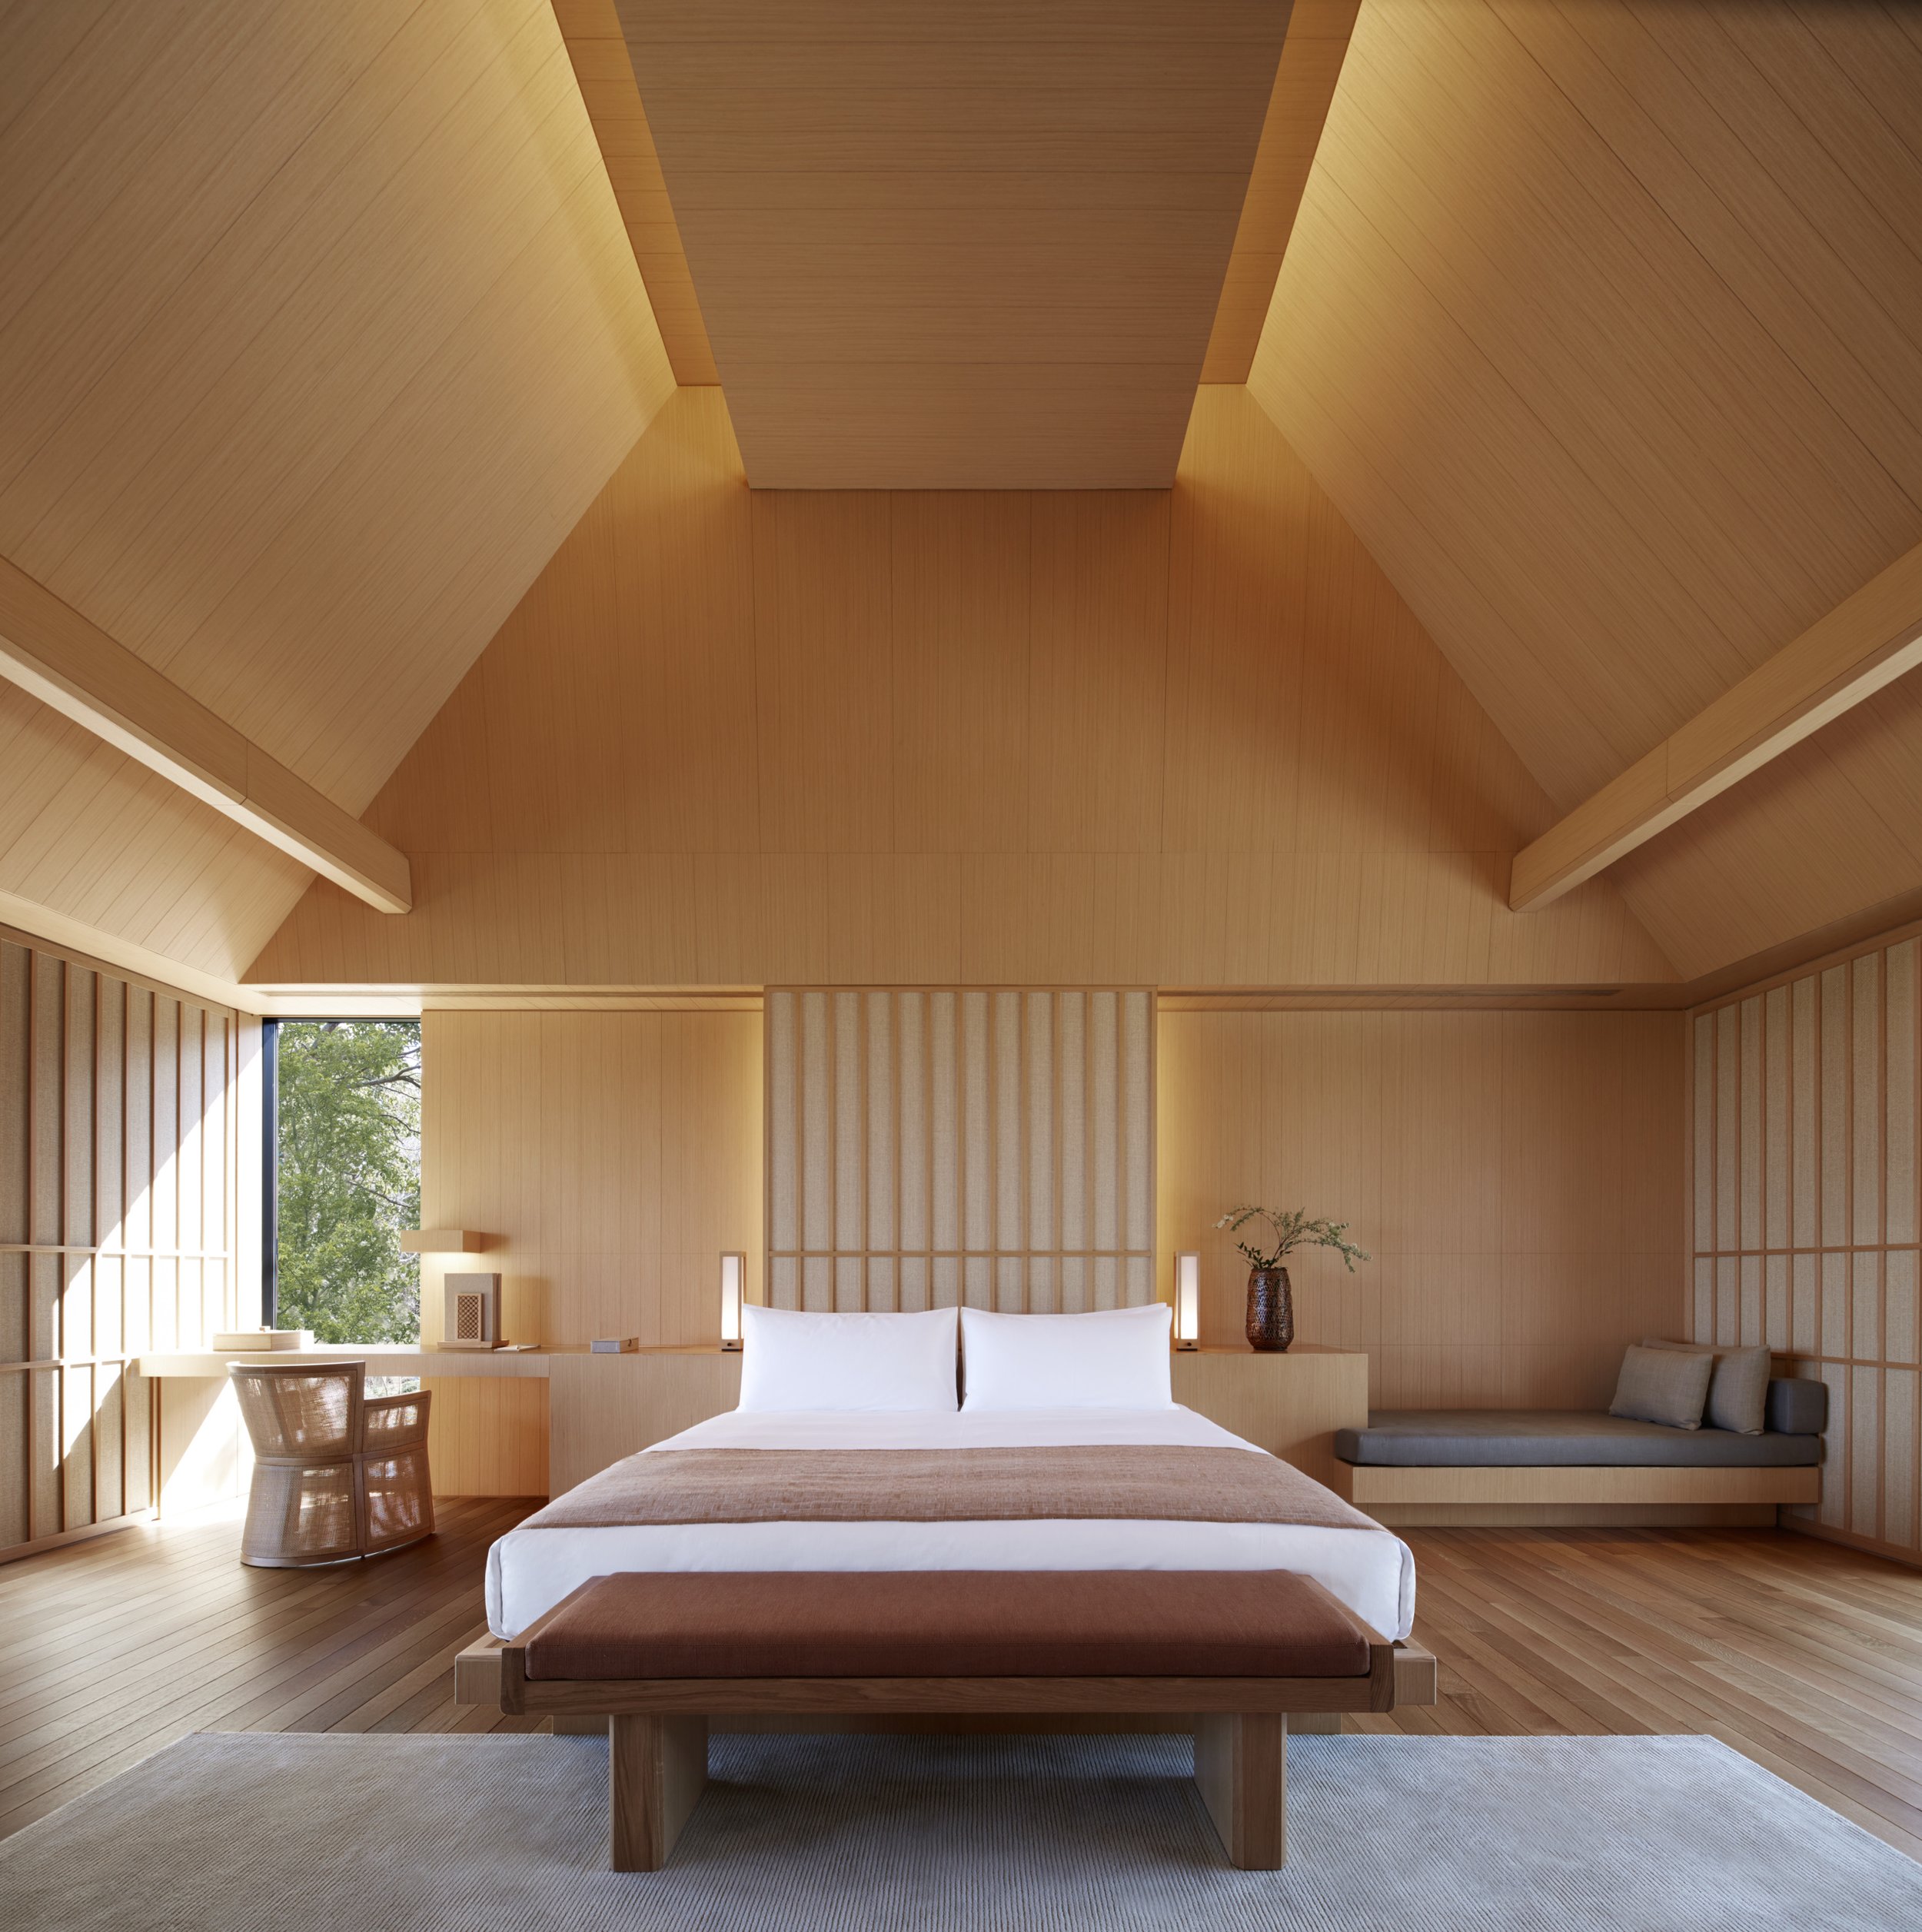  Low-slung roofs feature throughout all bedrooms 